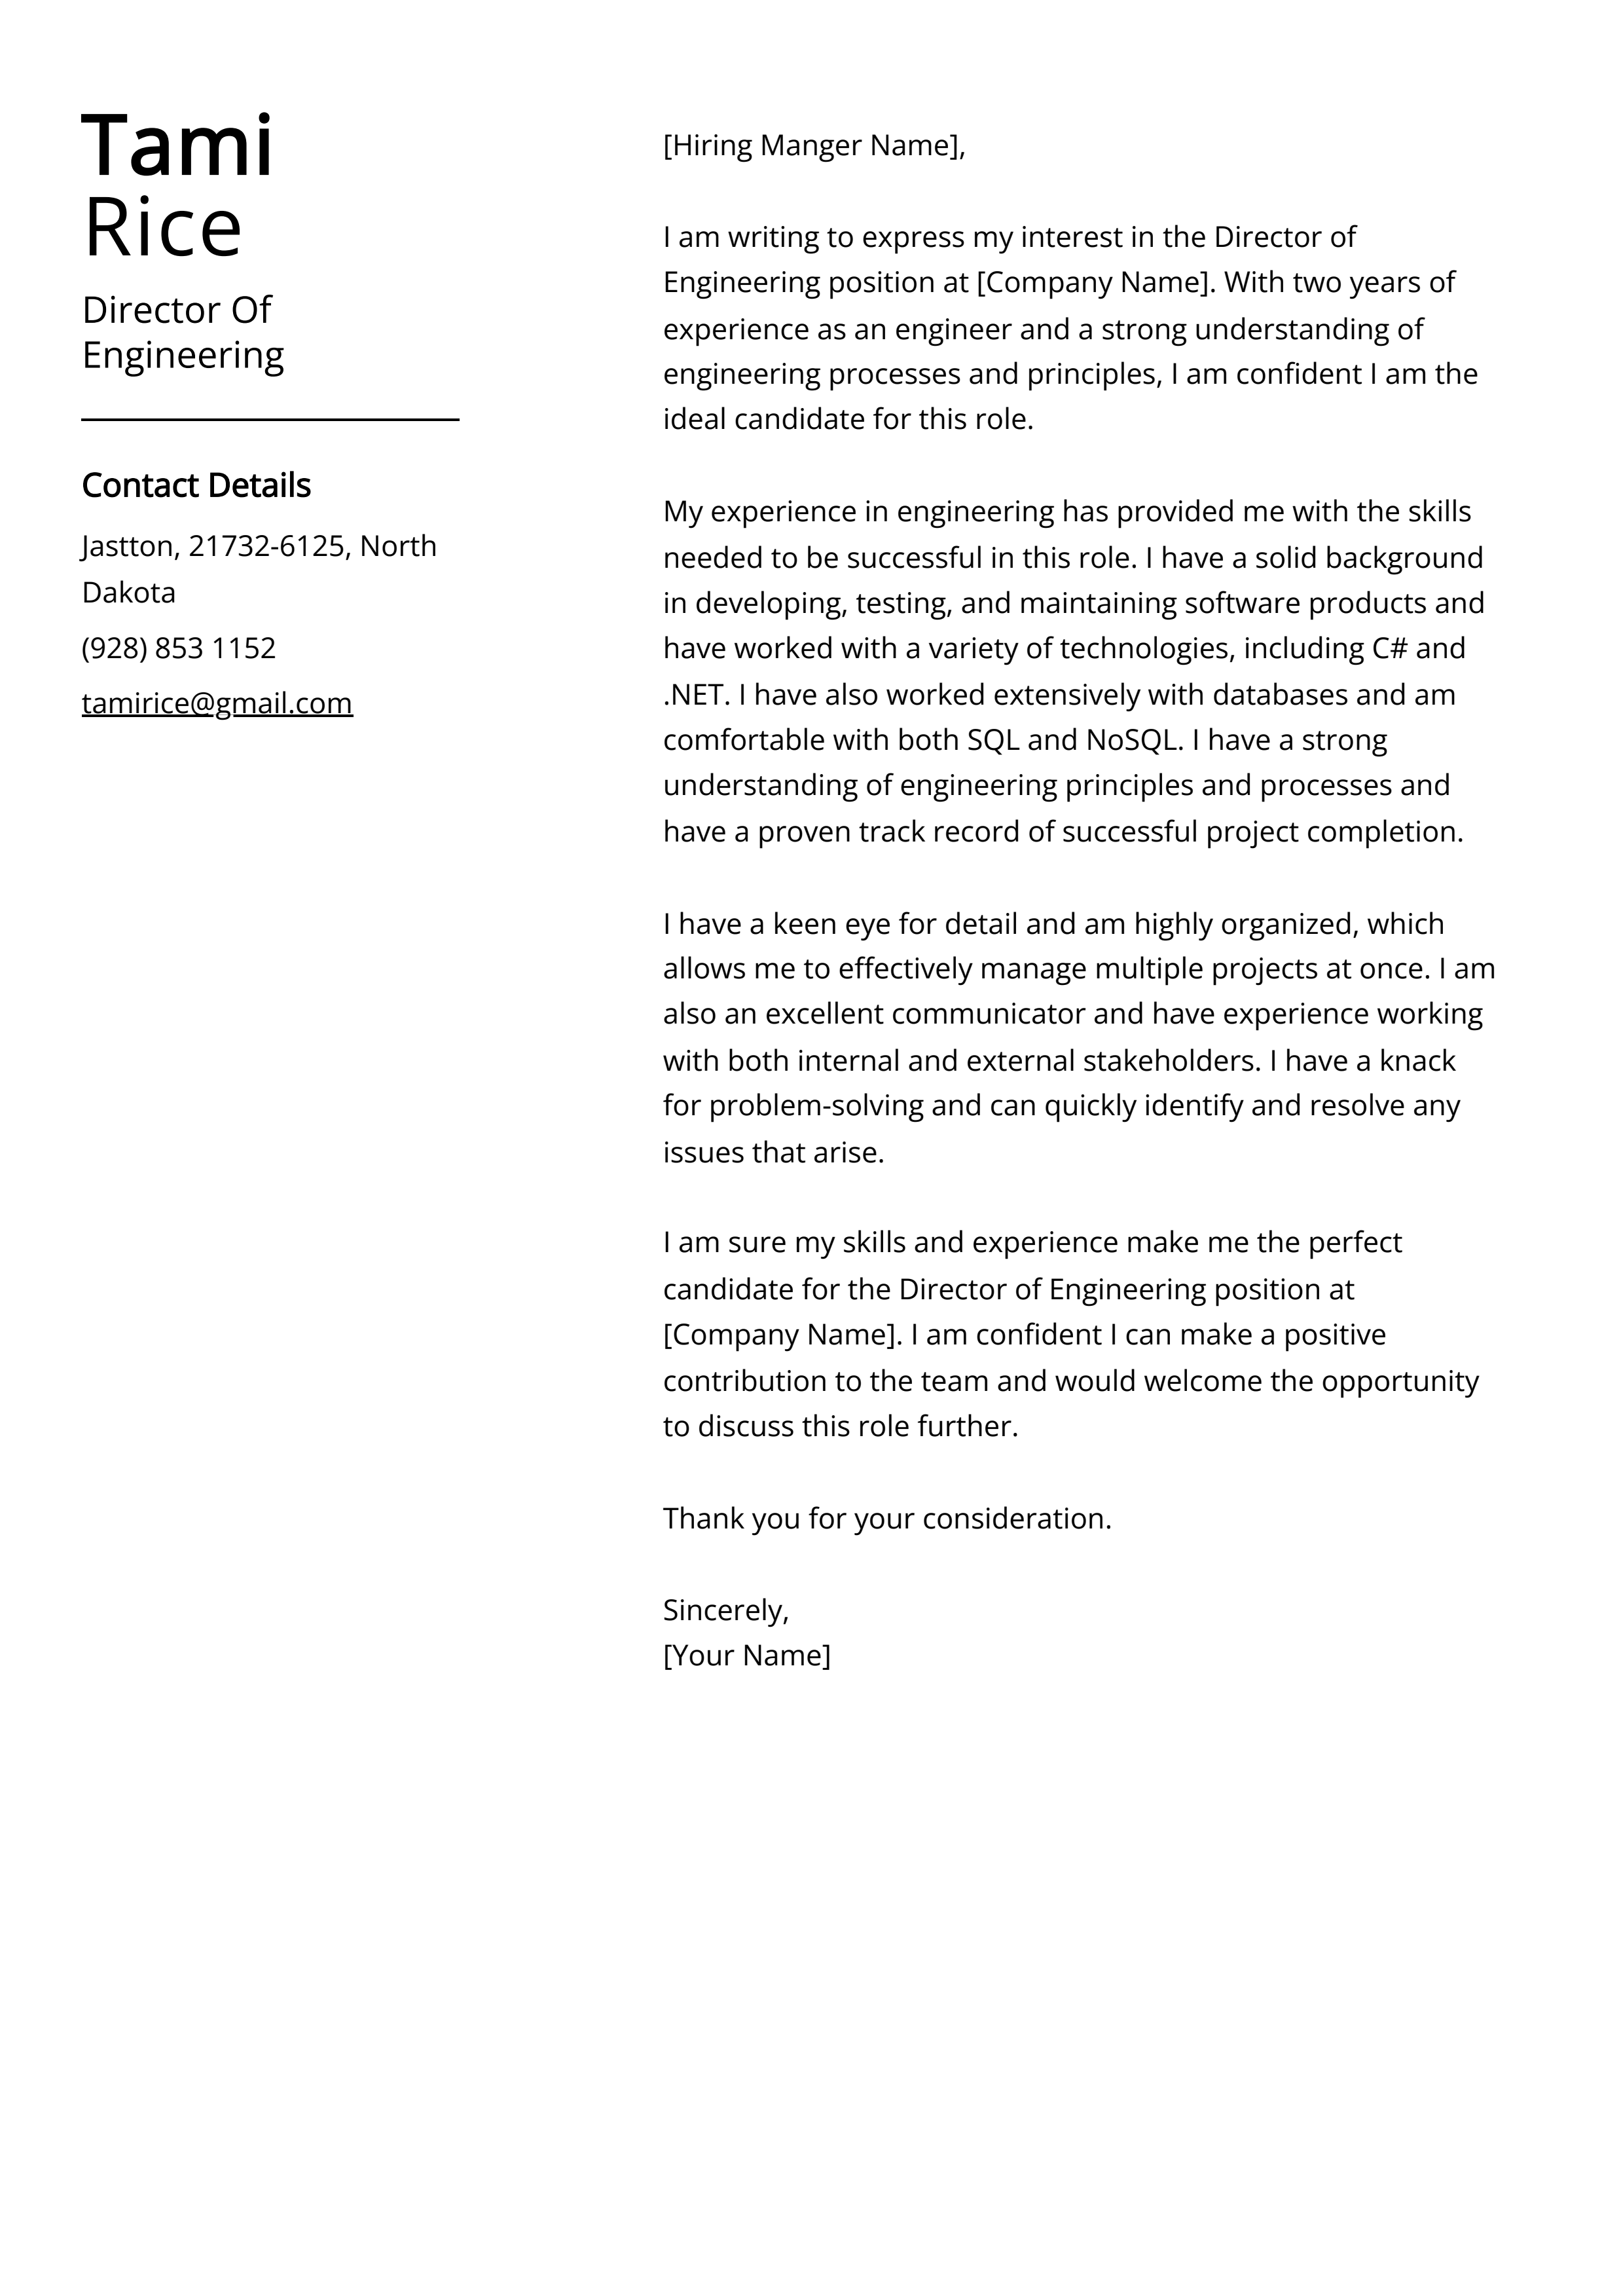 Director Of Engineering Cover Letter Example